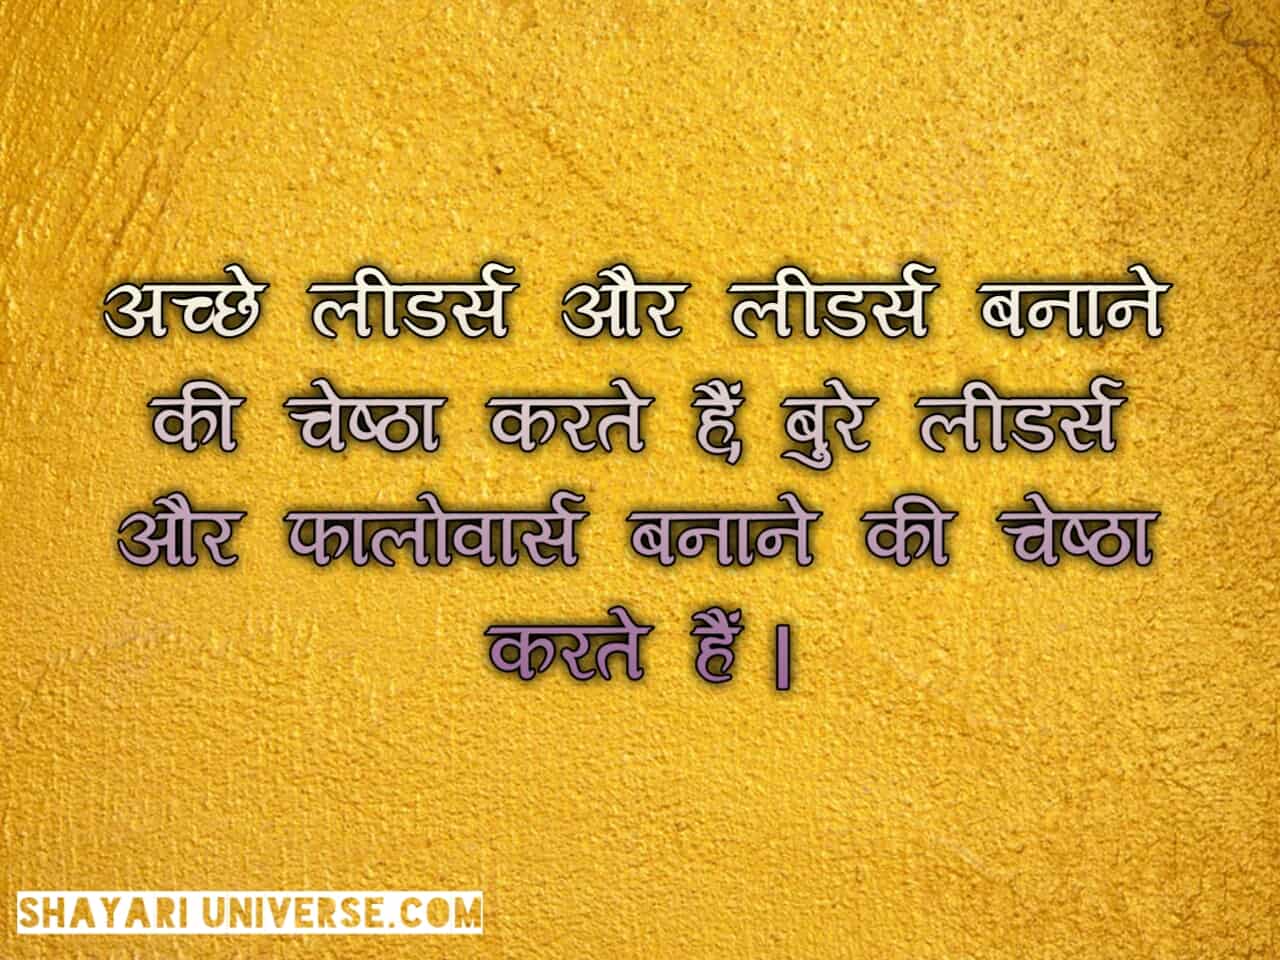 educational quotes in hindi